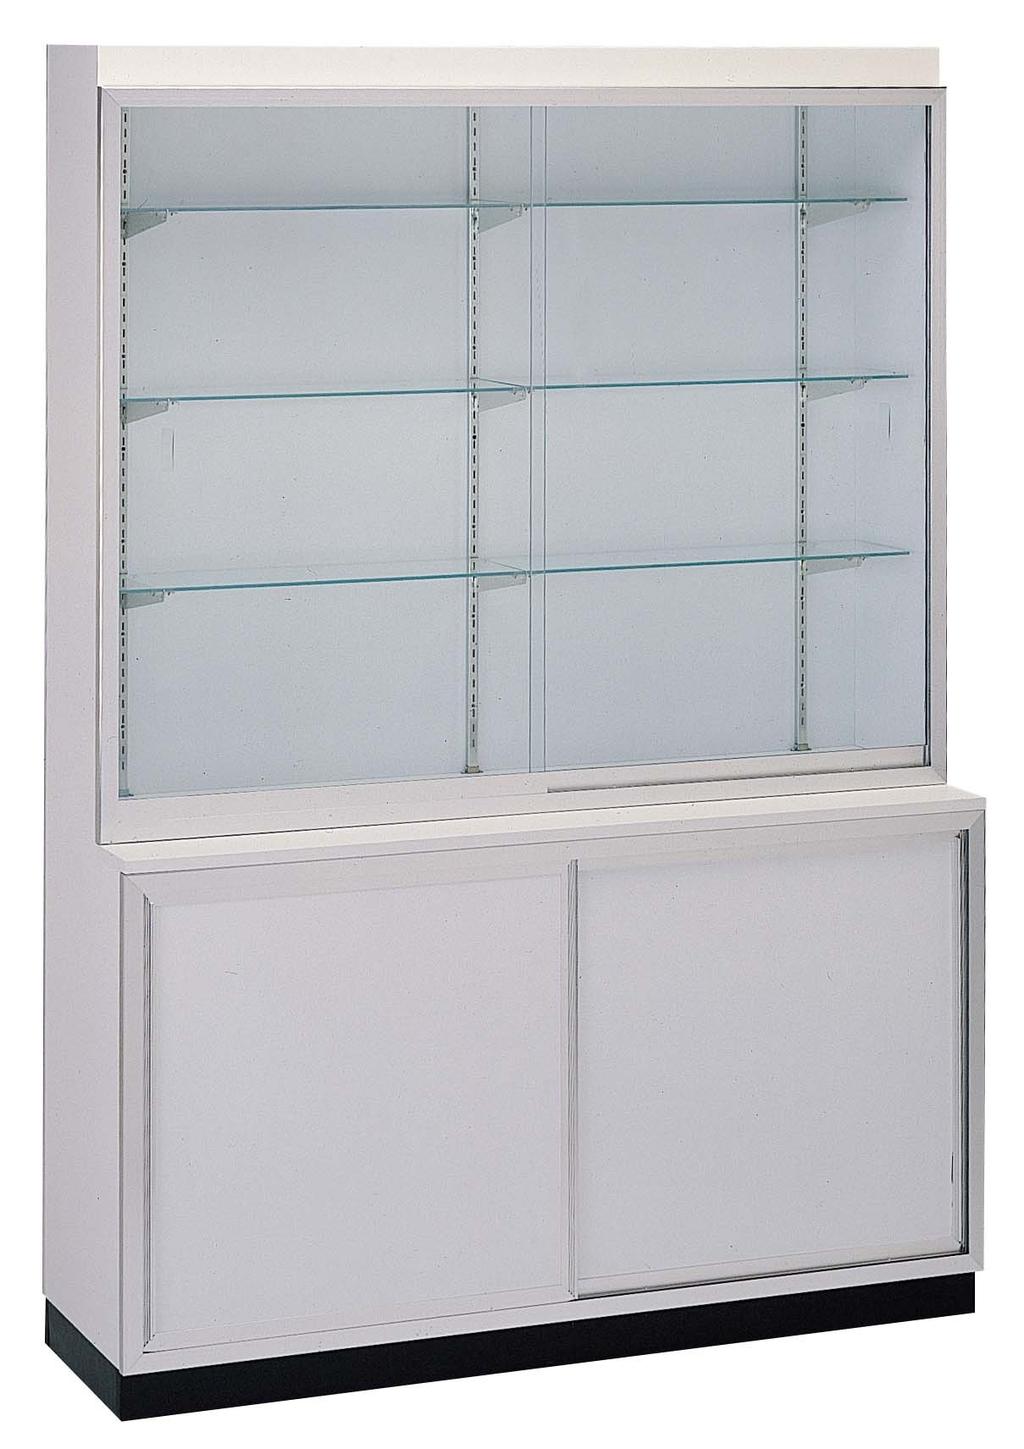 WL2500 Series Wall Display Showcase (with Ledge) Standard Specifications Laminated Front, Ends, and Interior Finish (TFM) 1/4 Tempered Glass Shelves